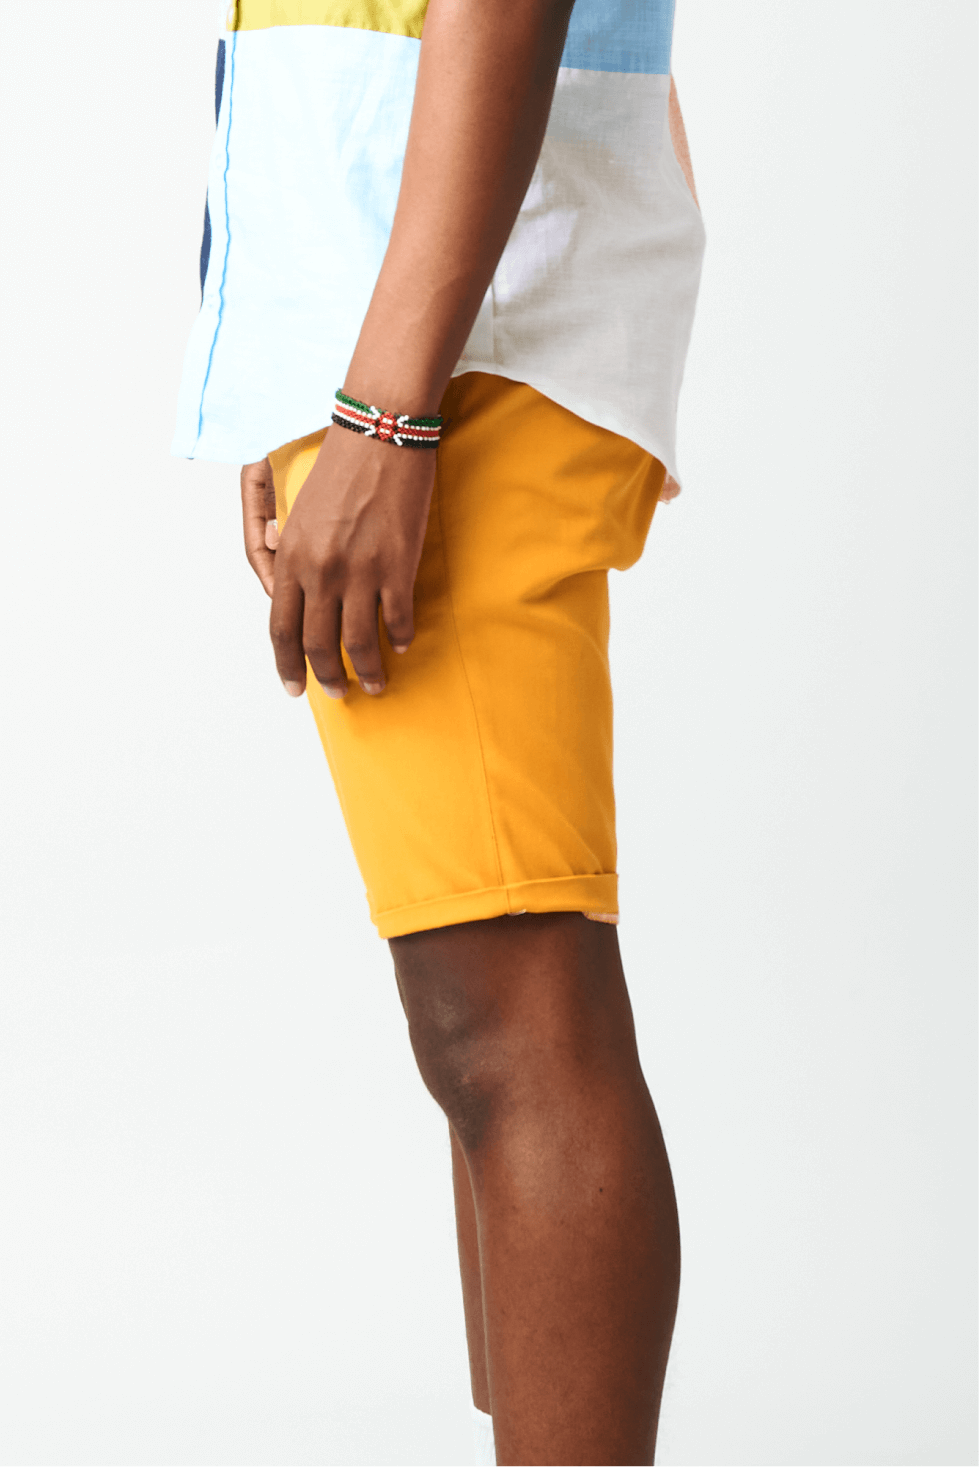 Shop Kila Mahali Shorts by Genteel on Arrai. Discover stylish, affordable clothing, jewelry, handbags and unique handmade pieces from top Kenyan & African fashion brands prioritising sustainability and quality craftsmanship.